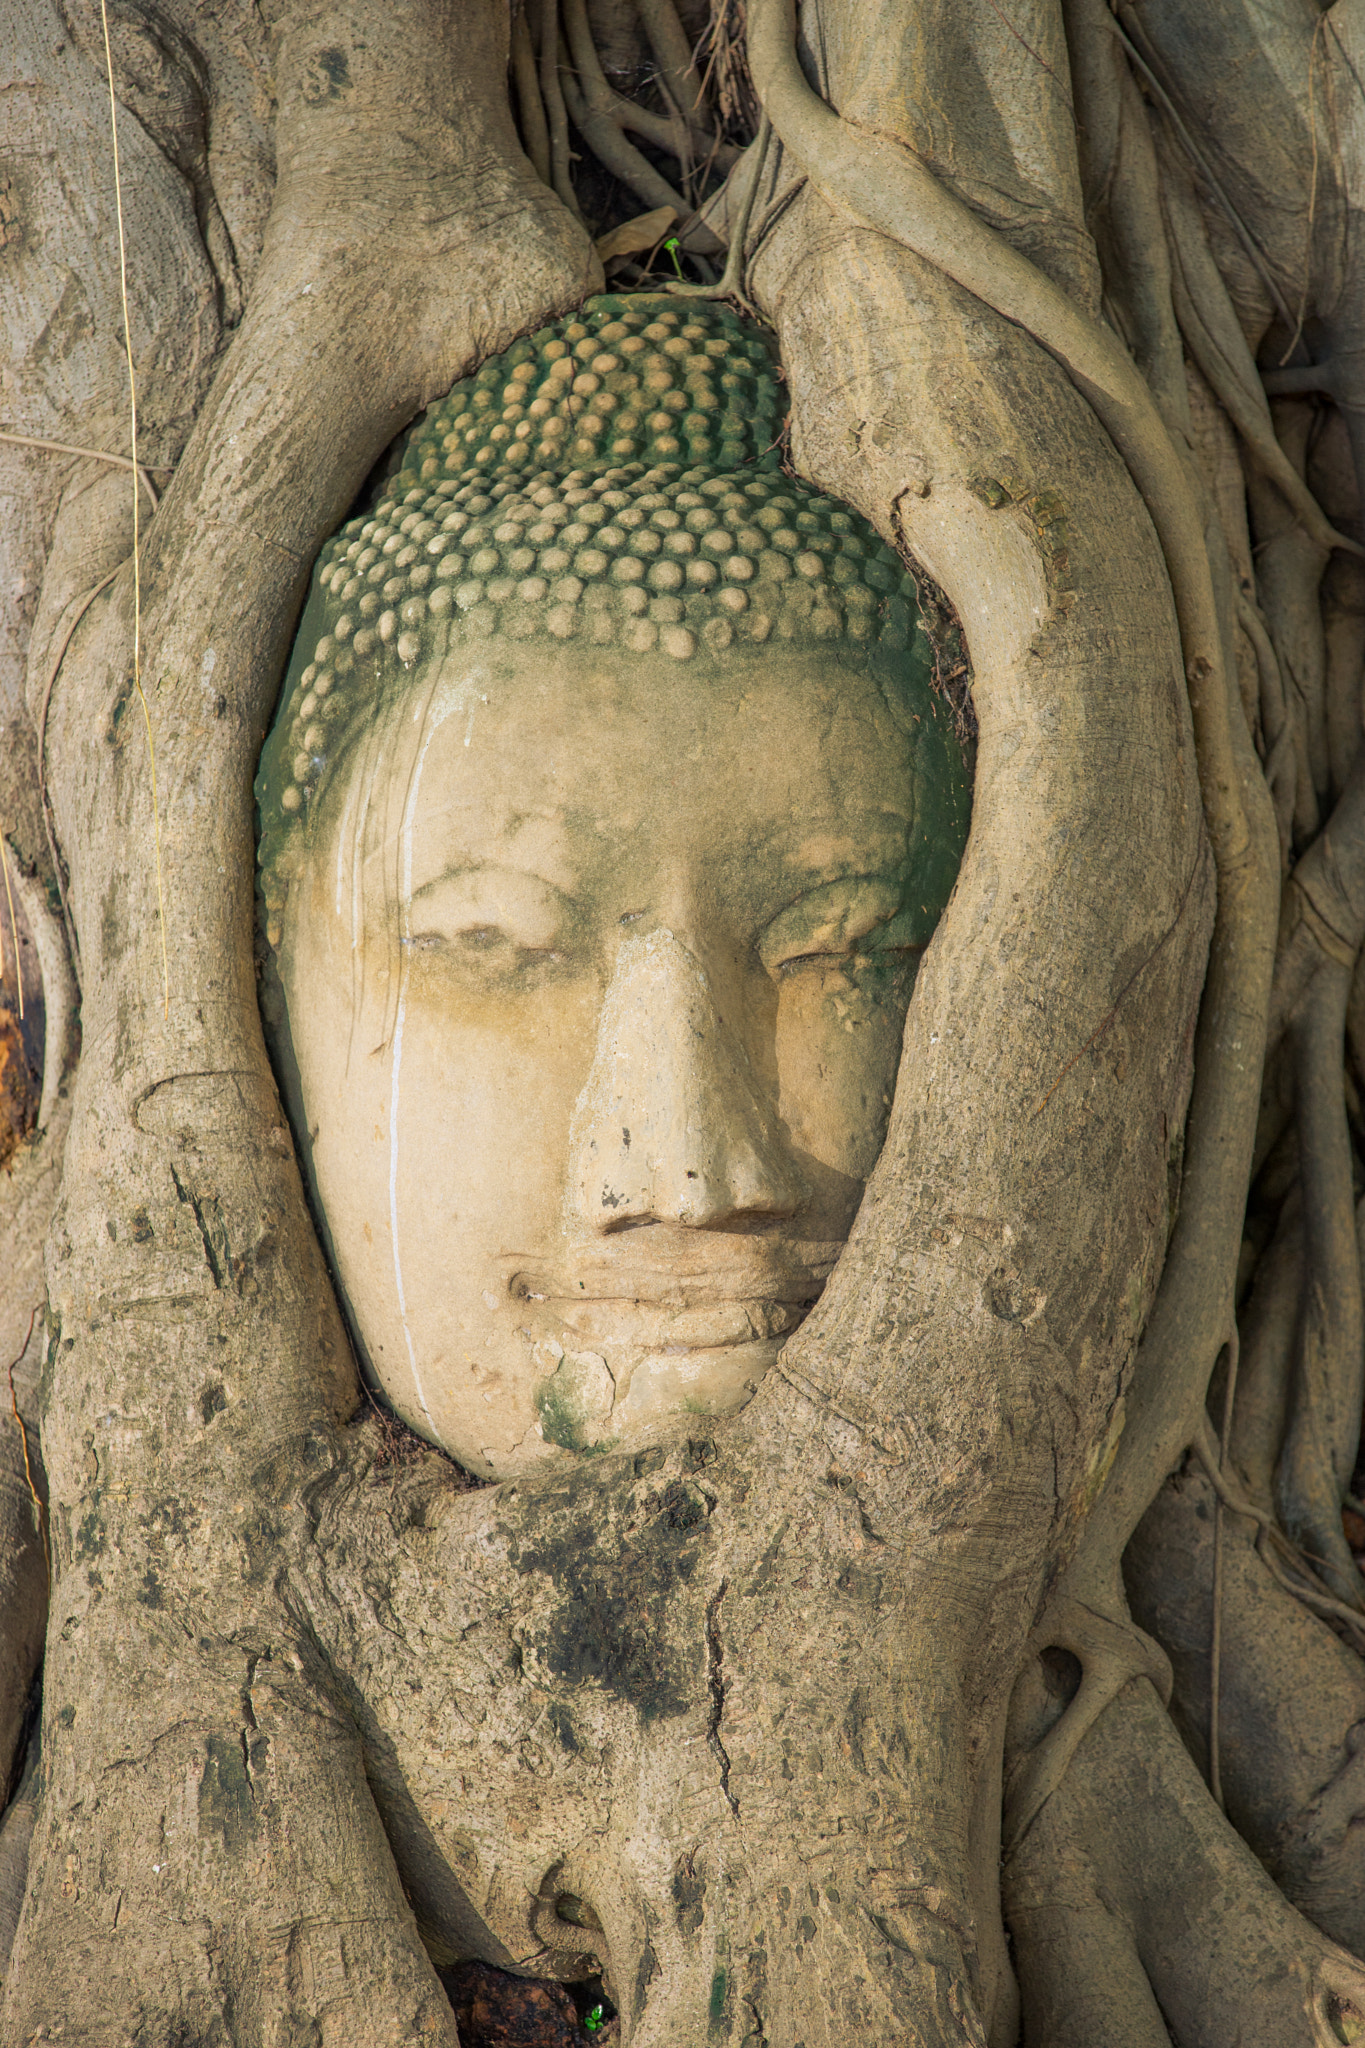 Sony a7 II sample photo. Buddha head looking off to the side embed in tree photography